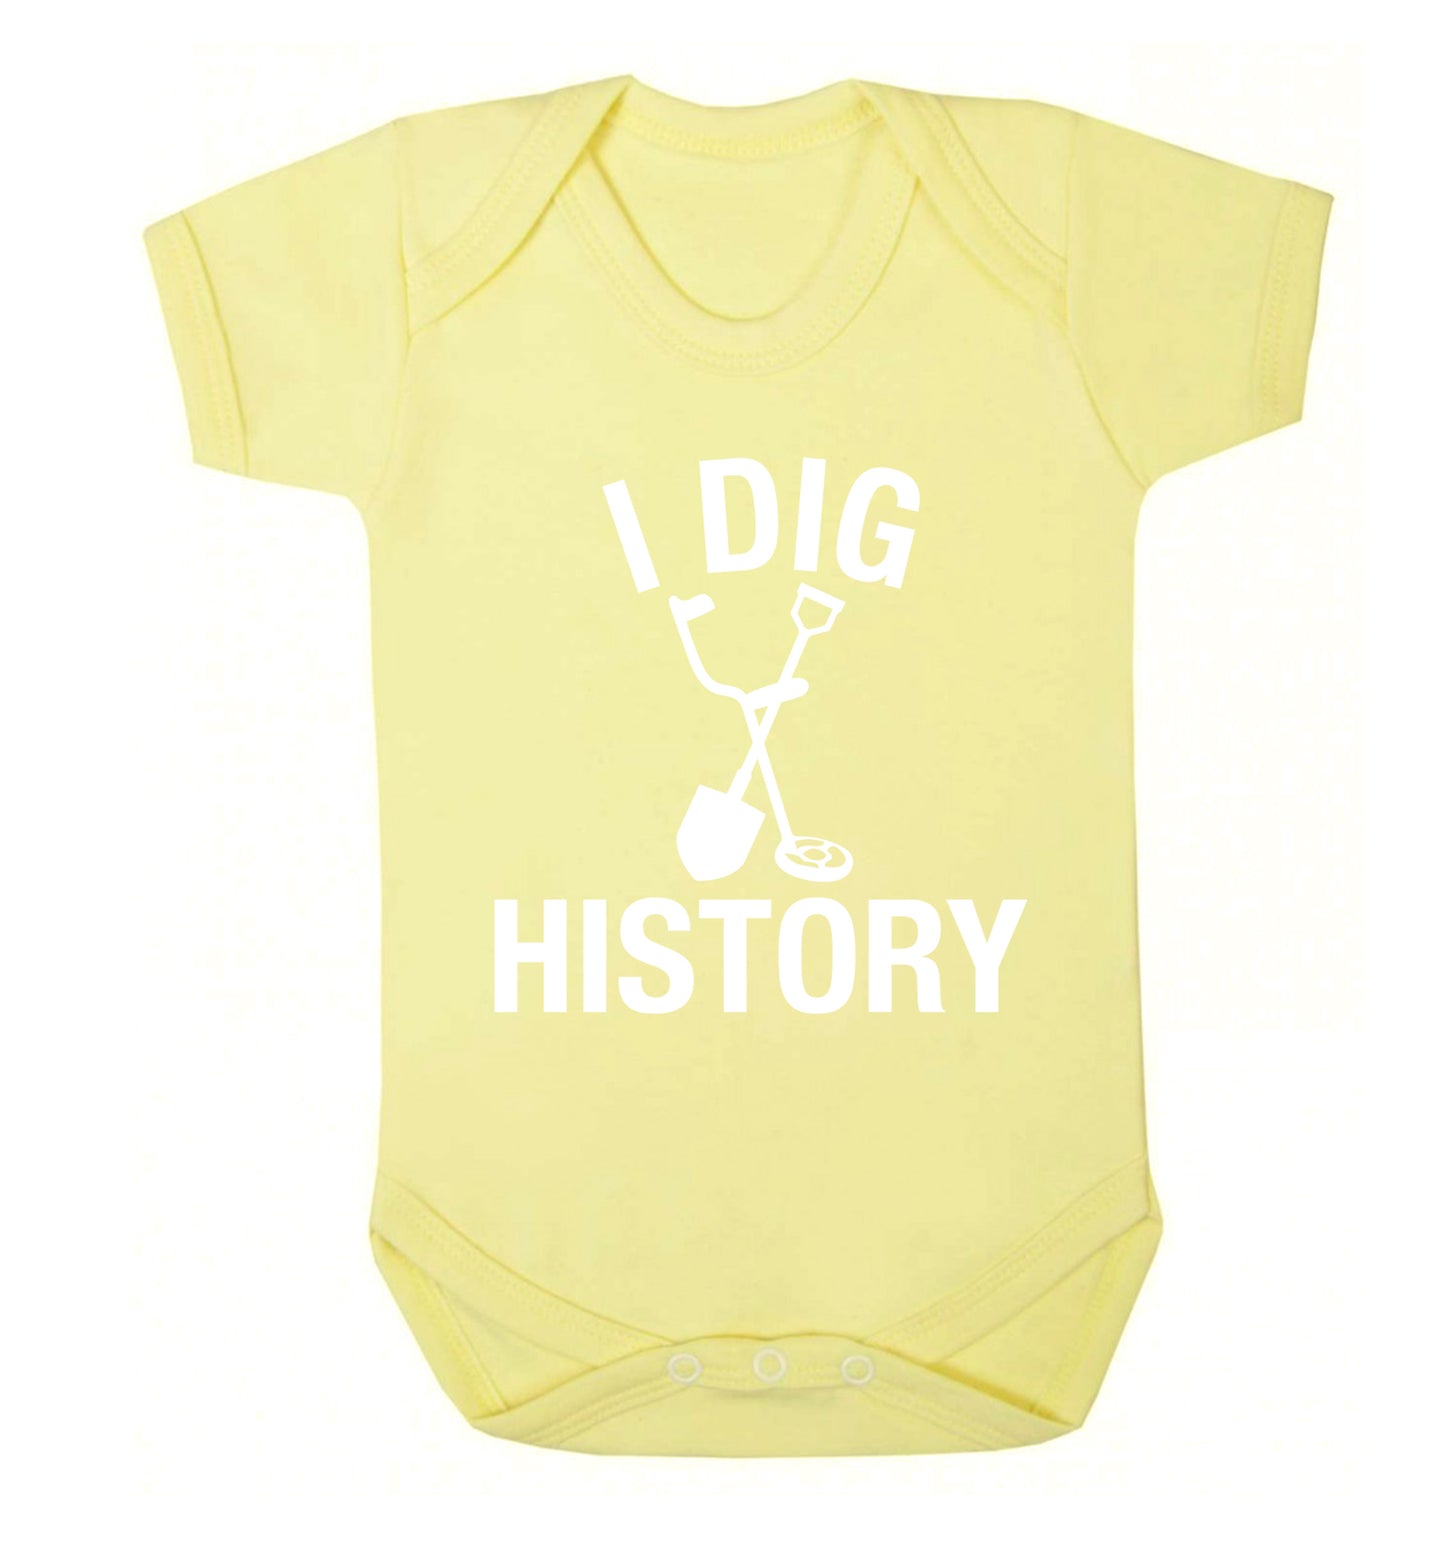 I dig history Baby Vest pale yellow 18-24 months